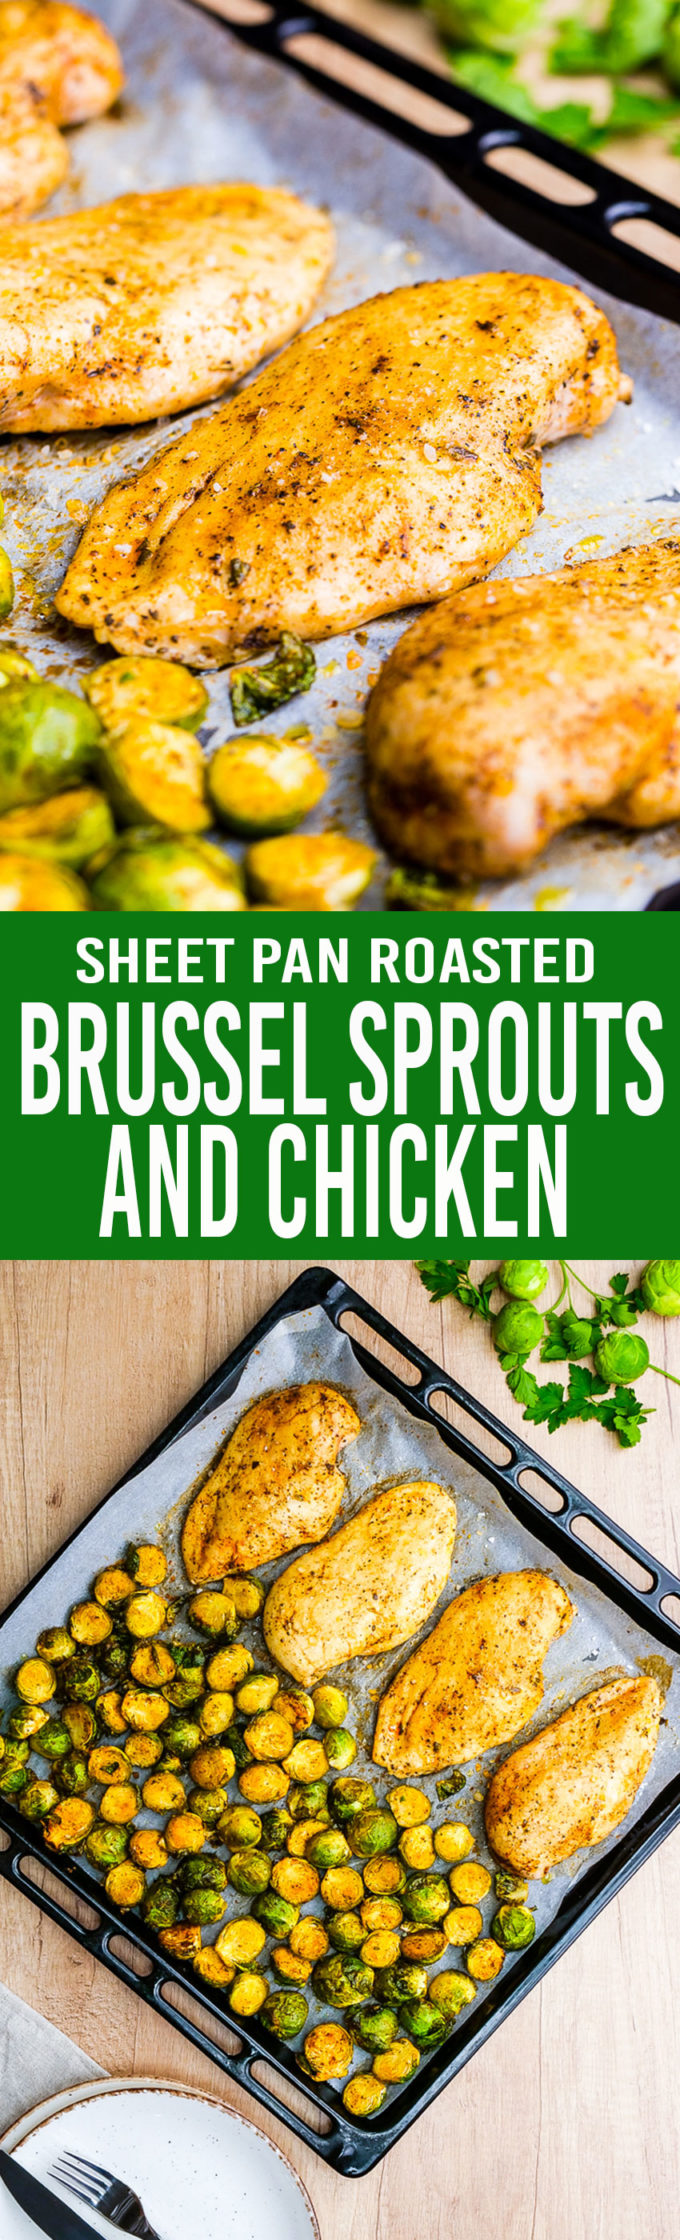 Sheet Pan Roasted Brussel sprouts with chicken